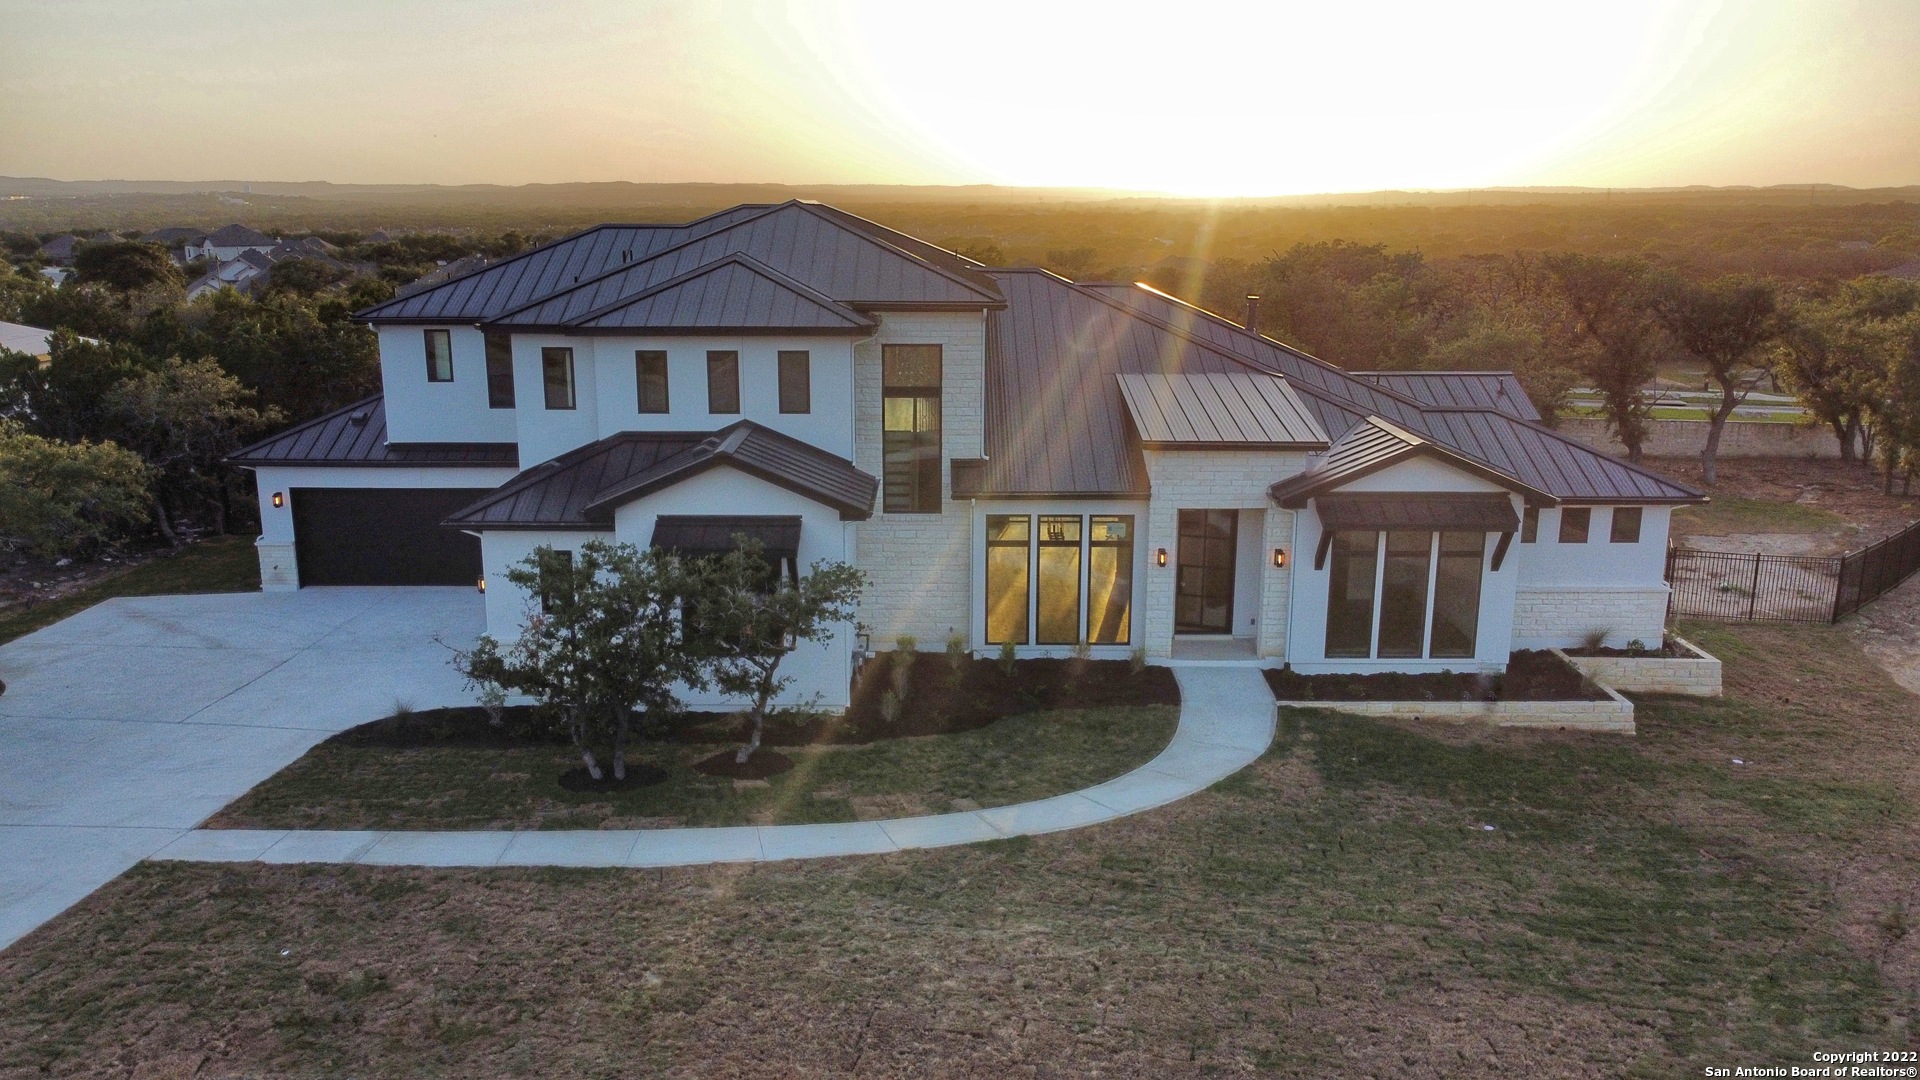 JUST COMPLETED CUSTOM 2 STORY W/ INCOMPARABLE FINISH OUT AND VIEWS VIEWS VIEWS! 5 BED/ 5.5 BATH/ STUDY/ OVERSIZED GAME ROOM W/ BALCONY/ 4 CAR GARAGE W/OUTDOOR LIVING ON .895 ACRE LOT LOCATED IN THE EXCLUSIVE LOMA LINDA CUSTOM HOME SECTION IN ESPERANZA, THE ONLY MASTER PLANNED COMMUNITY IN BOERNE. WALL OF WINDOWS IN FAMILY ROOM, LINEAR 60" FIREPLACE AND EITHER WHITE OAK HARDWOOD FLOORS, OR TILE THROUGHOUT. DESIGNER SHOWCASE GOURMET KITCHEN INCLUDES CABINETS TO THE CEILING, LUX APPLIANCES INCLUDING 48" BUILT IN FRIDGE, 48" RANGE, MICROWAVE DRAWER, WINE RESERVE, HUGE ISLAND W/ PREP SINK AND BUILT-IN TABLE, LARGE WINDOW ABOVE 45" KIT SINK FOR NATURAL LIGHT, OUTDOOR LIVING W/ GRILL GREAT FOR PARTIES. ALL BEDROOMS HAVE WELL PLACED WINDOWS TO MAXIMIZE THE VIEWS! LUXURIOUS OWNER'S SUITE WITH FREE STANDING TUB,  SPACIOUS WALK-IN SHOWER, GLAMOROUS WALK-IN CLOSET W/ ISLAND DRESSER. LAUNDRY ROOM W/ CABINETS GALORE INCLUDES SPACE FOR SECOND FRIDGE, SINK AND ISLAND. CEDAR LINED CLIMATE CONTROLLED STORAGE CLOSET. ESPERANZA HAS ALL CITY SERVICES PLUS FIBER TO THE CURB BY GVTC. HEAVILY TREED BACKYARD, AND HILL COUNTRY VIEWS FROM THE OUTDOOR LIVING AND UPSTAIRS BALCONY TO WATCH BEAUTIFUL SUNSETS!